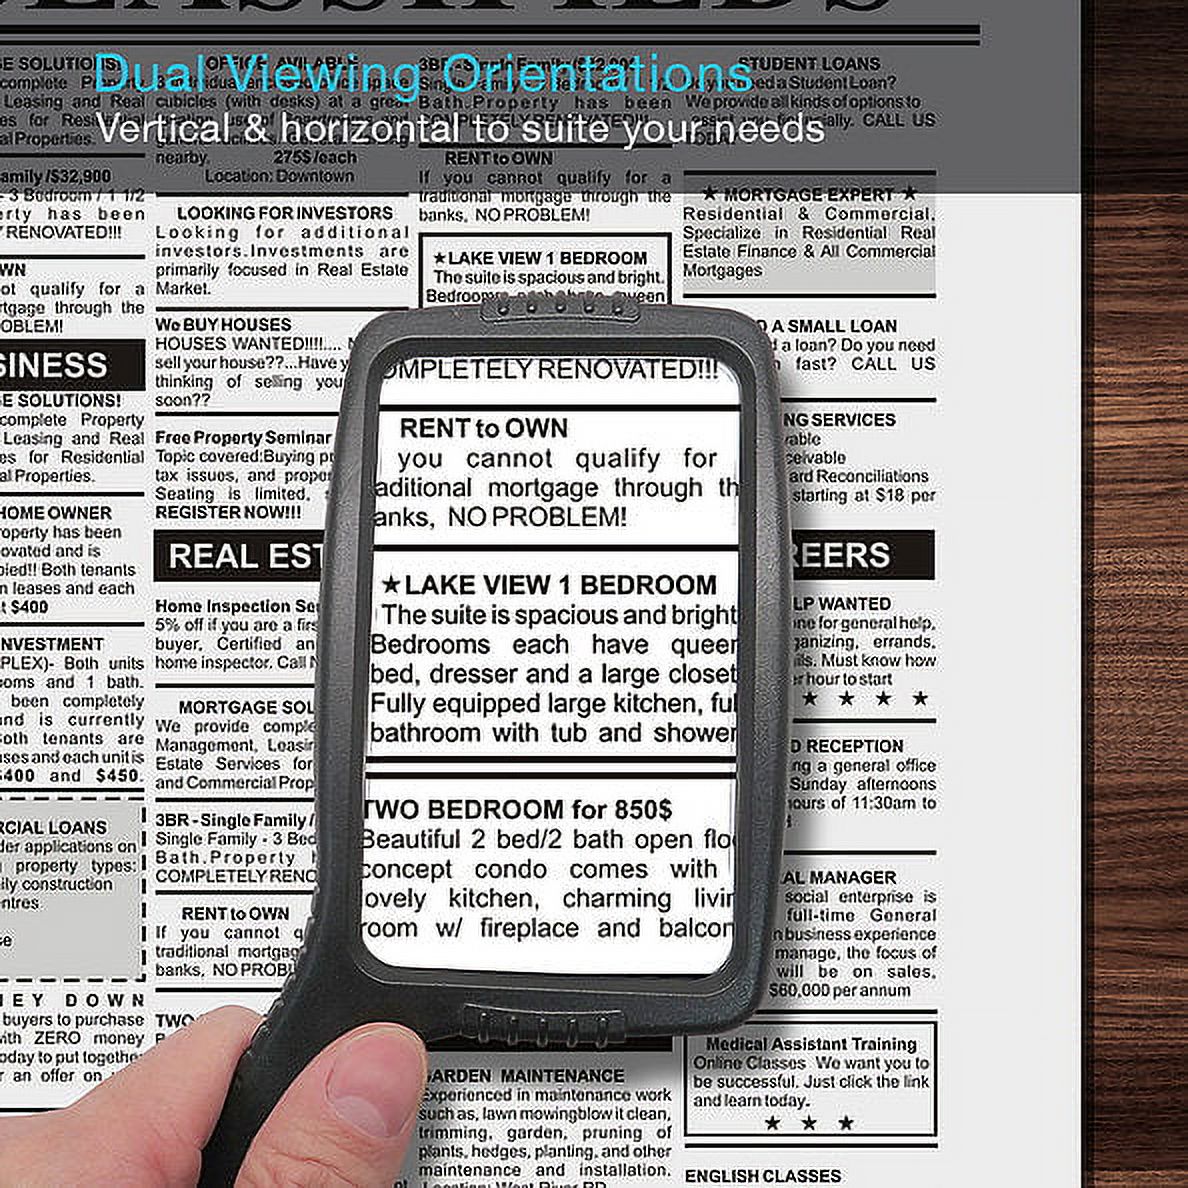 MagniPros 3X(300%) Magnifying Glass-Large Rectangular Viewing Area-Shatterproof - image 4 of 7